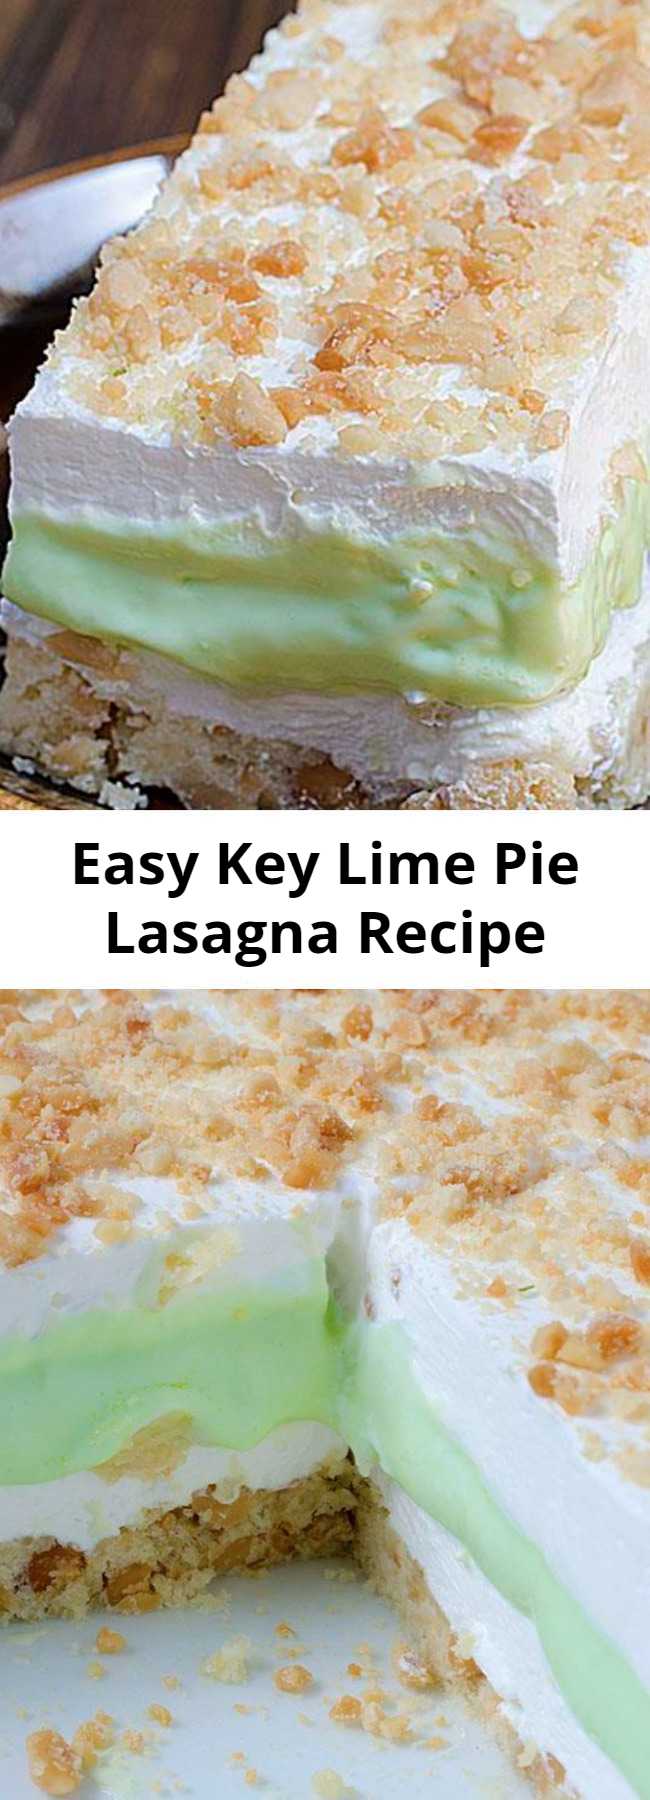 Easy Key Lime Pie Lasagna Recipe - Key Lime Pie Lasagna is cool, light and creamy summer dessert with sweet and tart layers of yumminess.